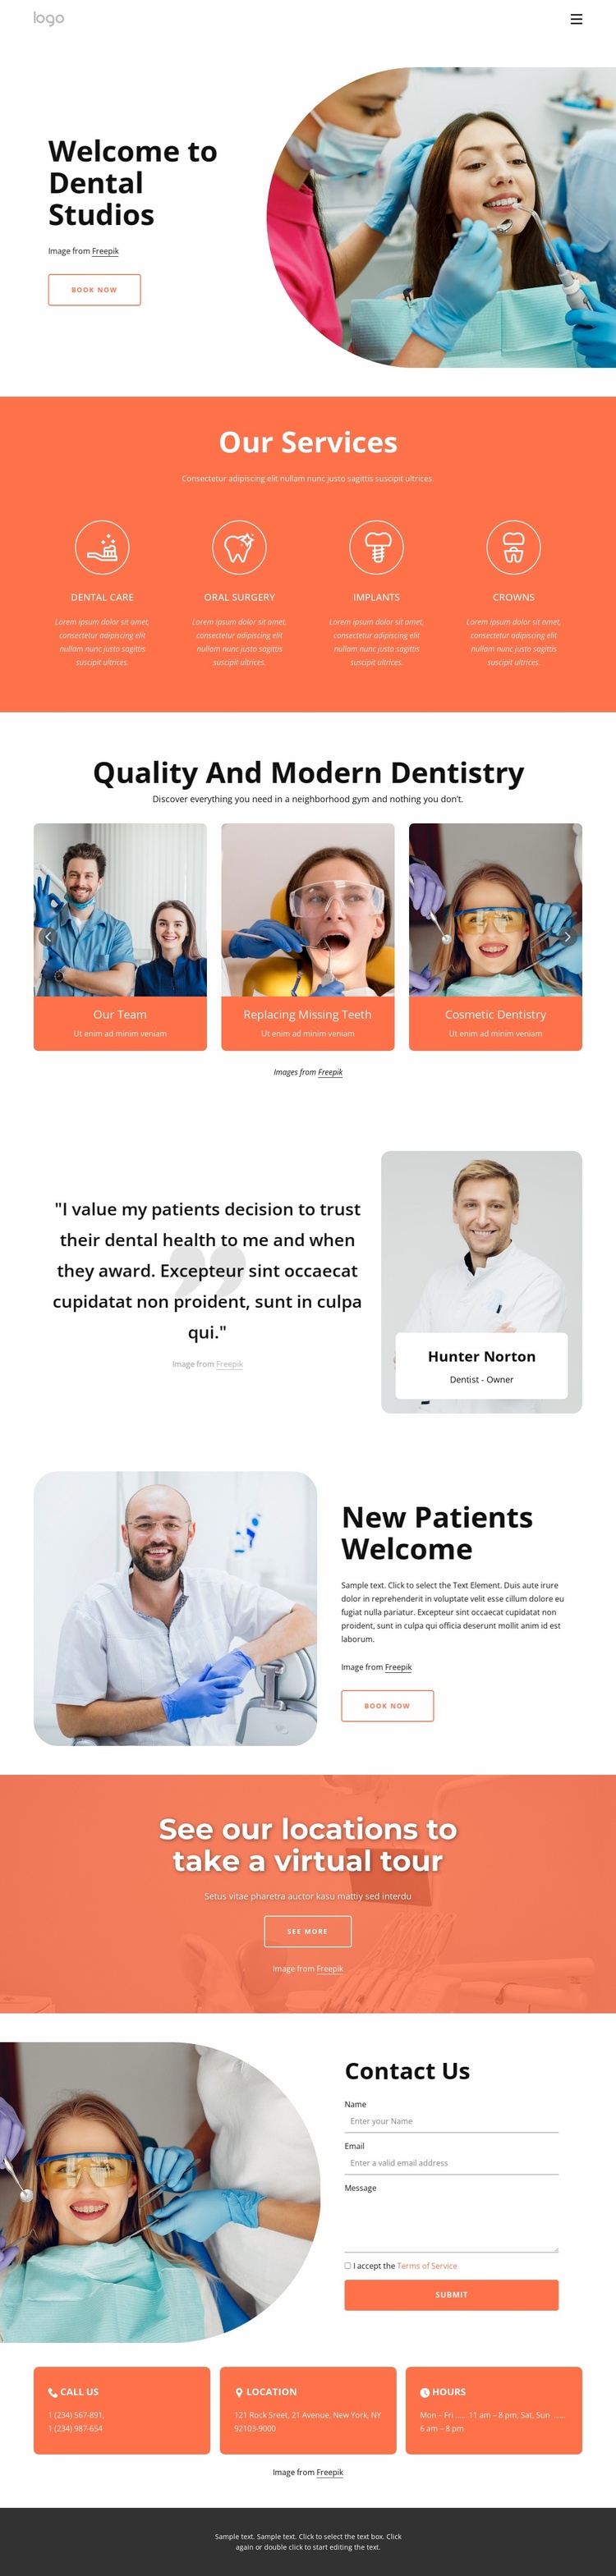 Welcome to dental studios eCommerce Template